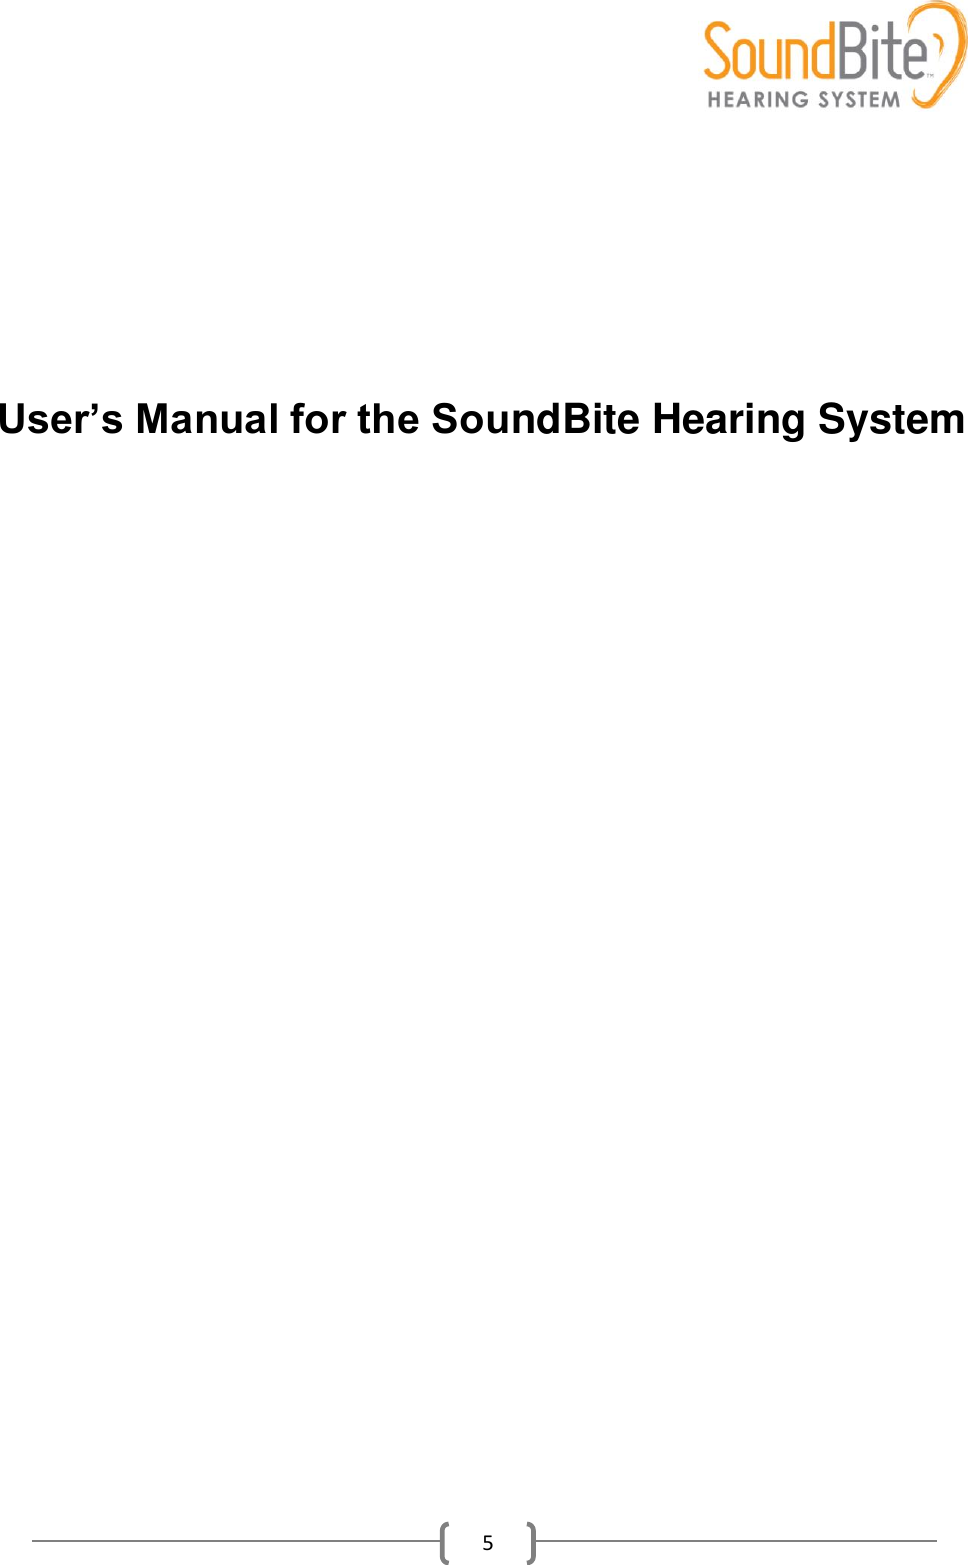    5       User’s Manual for the SoundBite Hearing System    